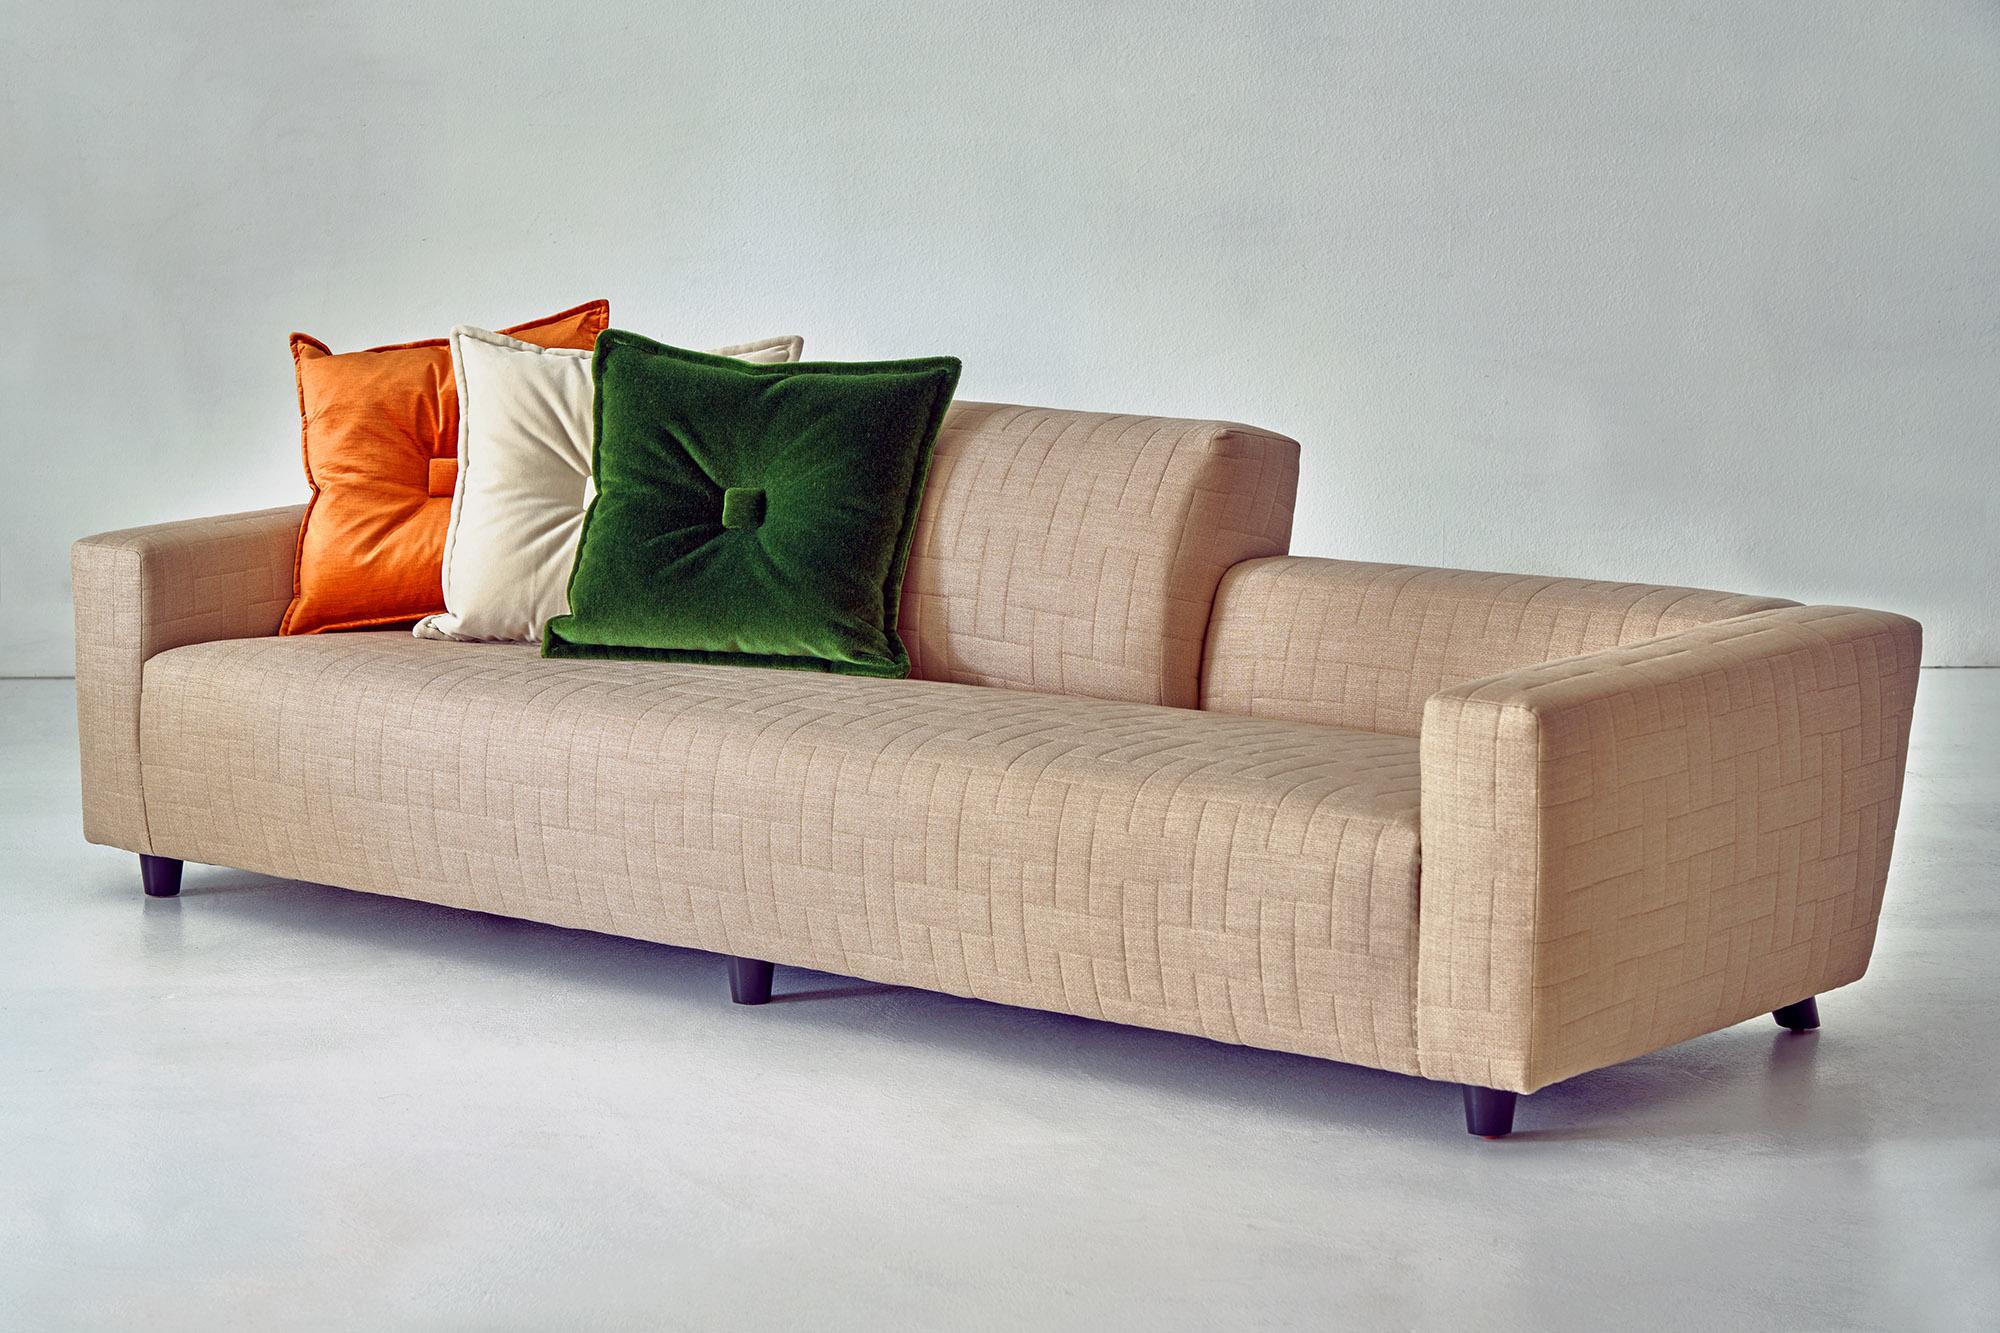 A Quilted Chaise/Sofa designed by William Haines 1